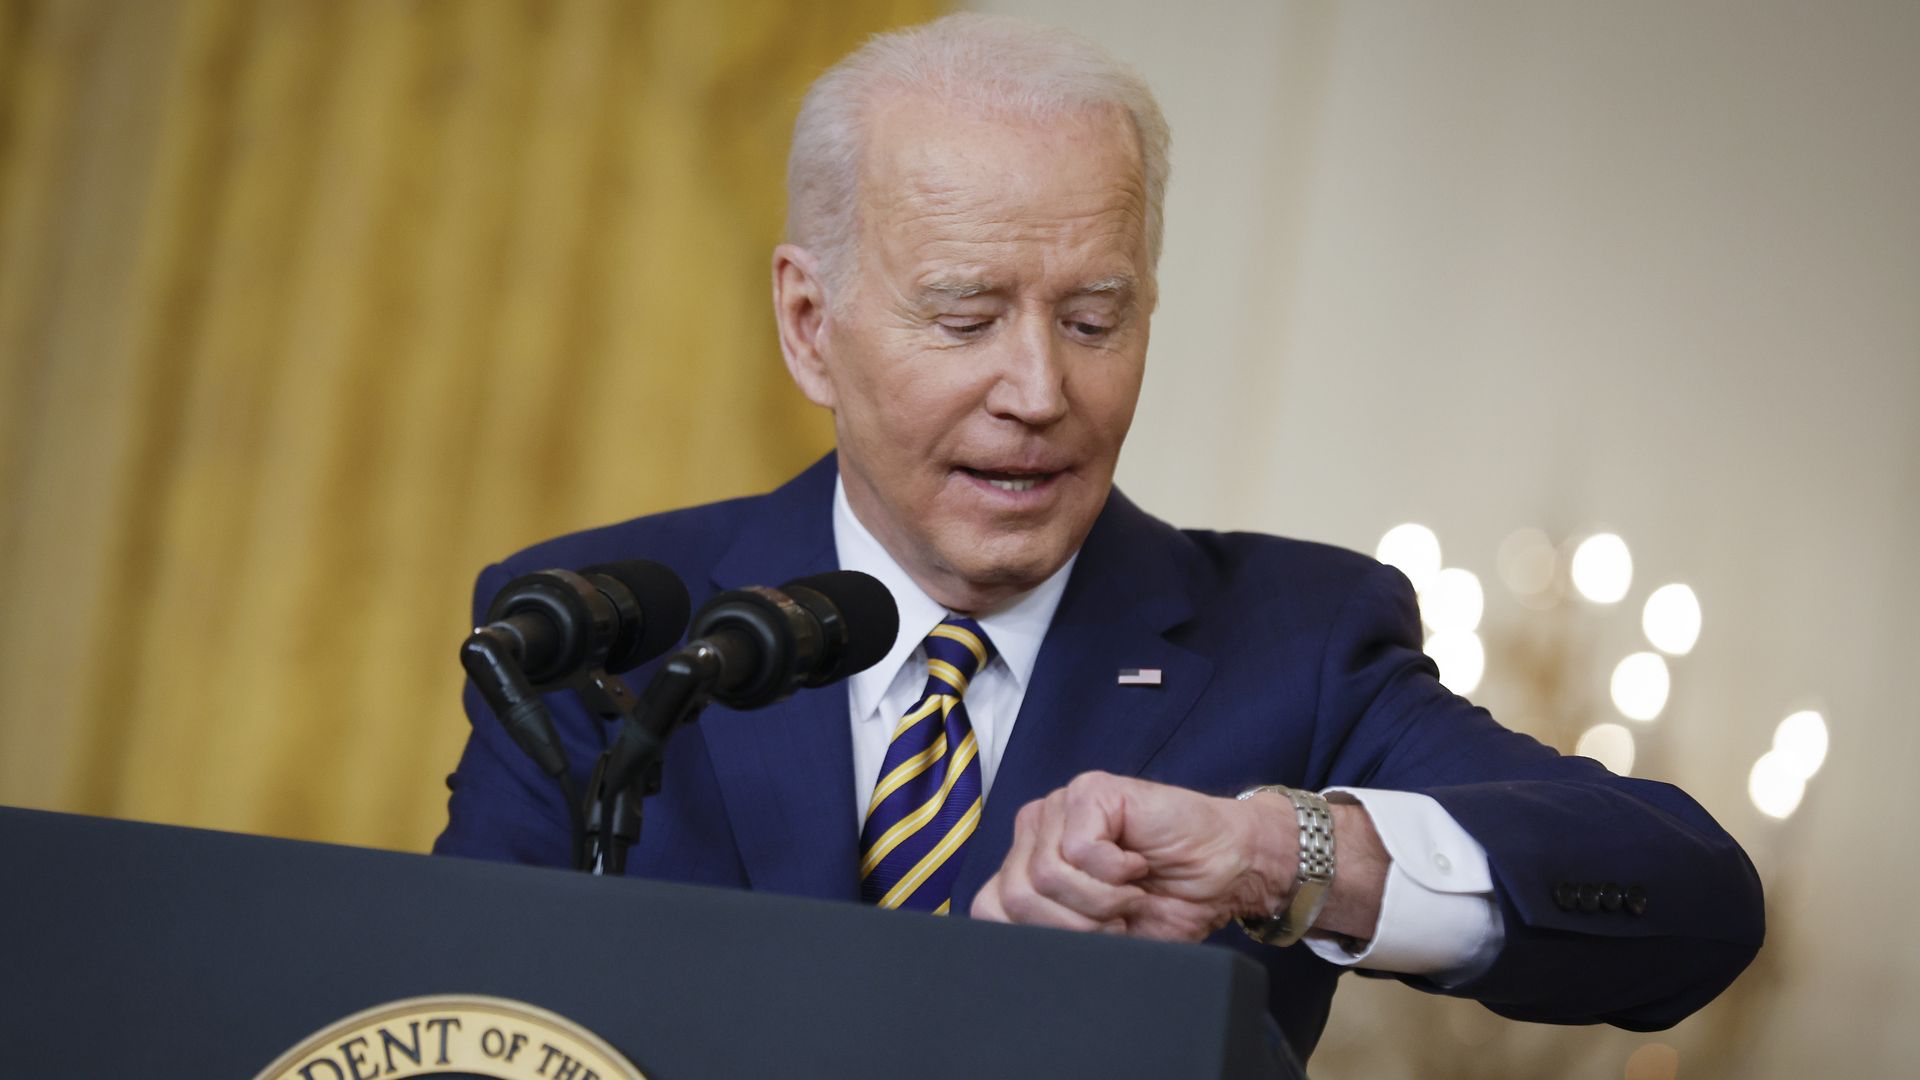 President Biden is seen checking his watch as his news conference goes into overtime on Wednesday.